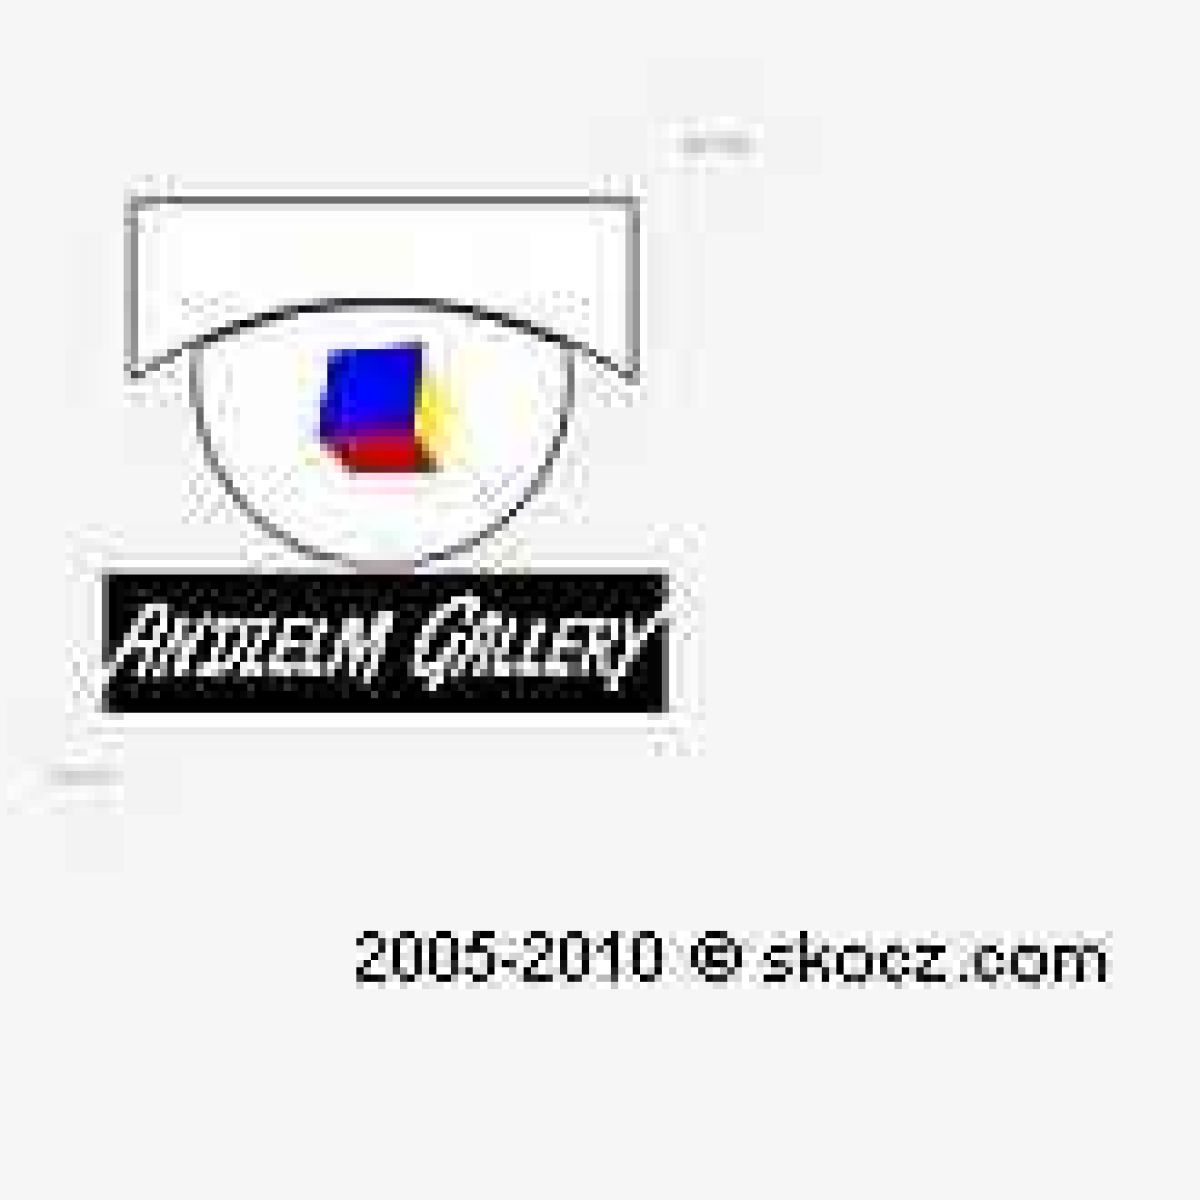 Andzelm Gallery